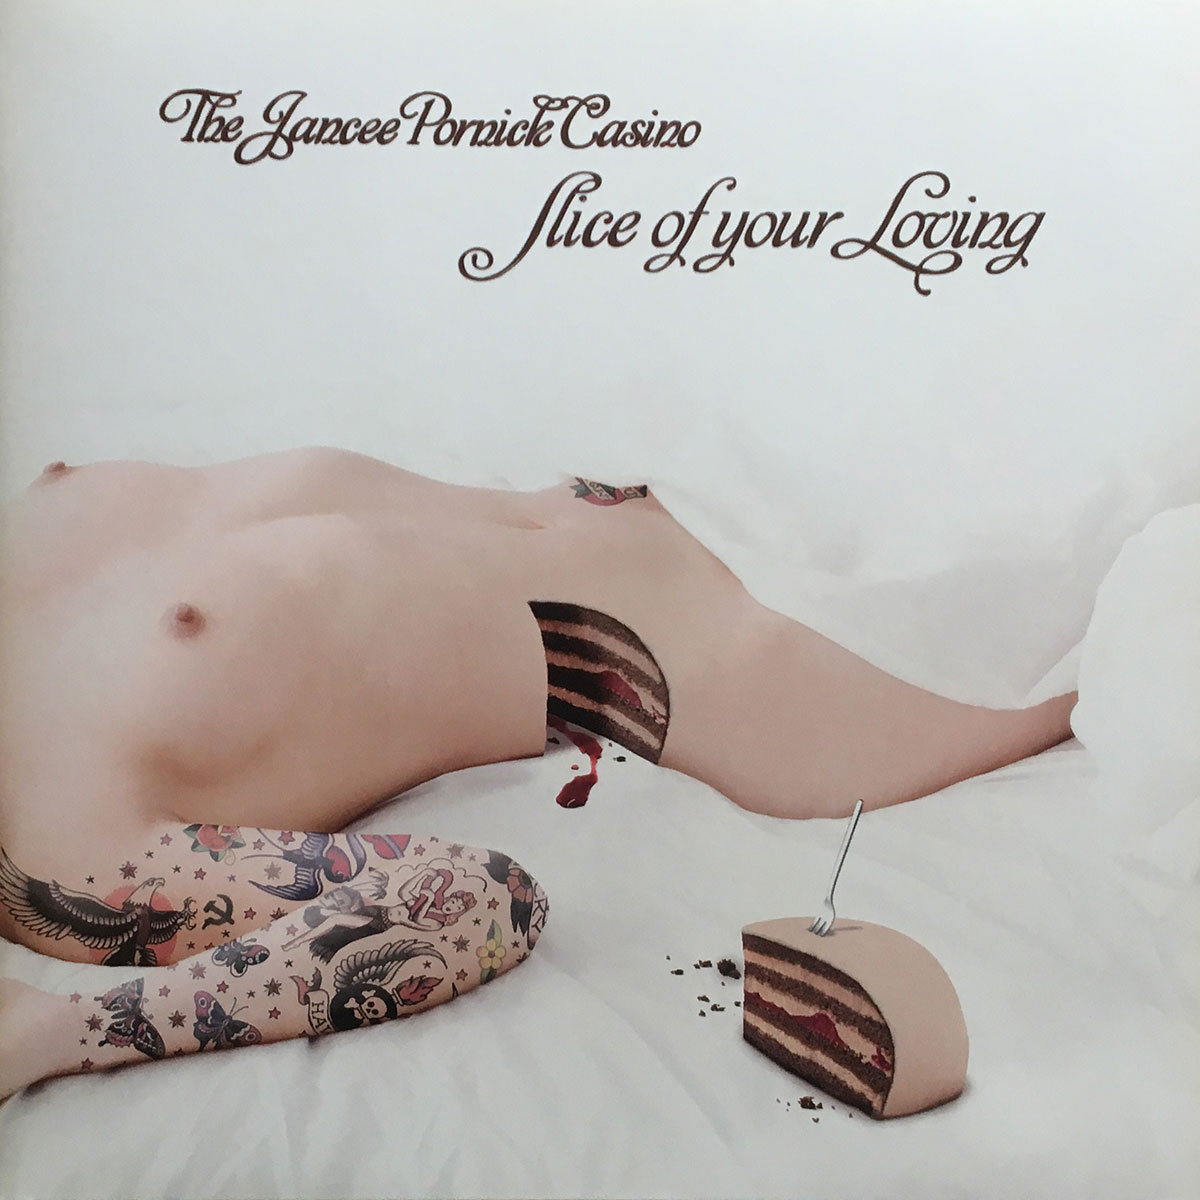 The Jancee Pornick Casino - Slice Of Your Loving